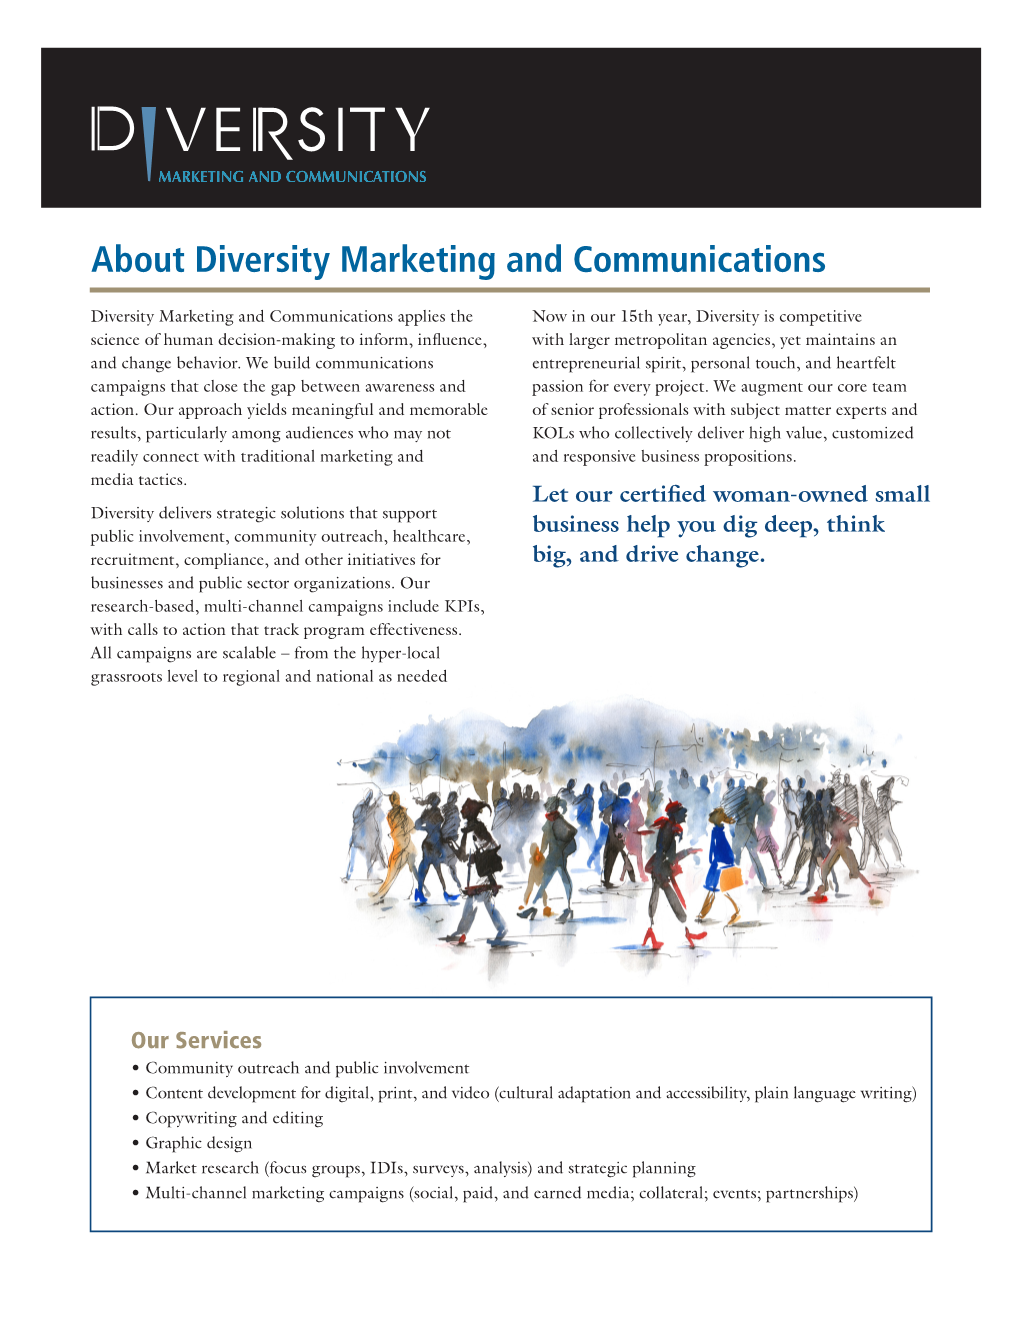 About Diversity Marketing and Communications